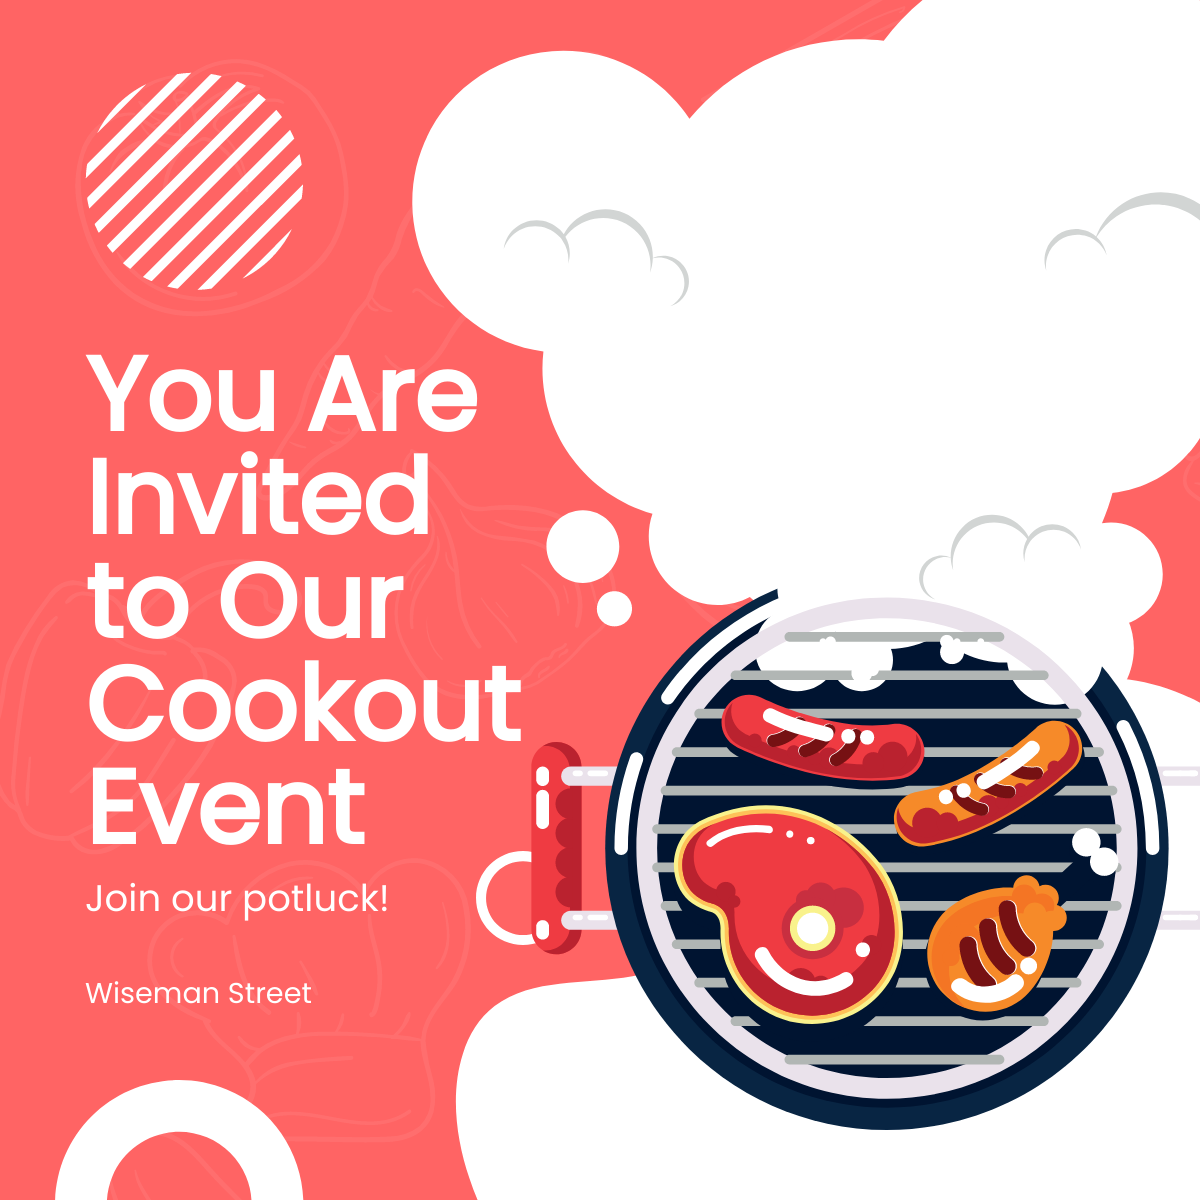 Cookout Event Linkedin Post Template